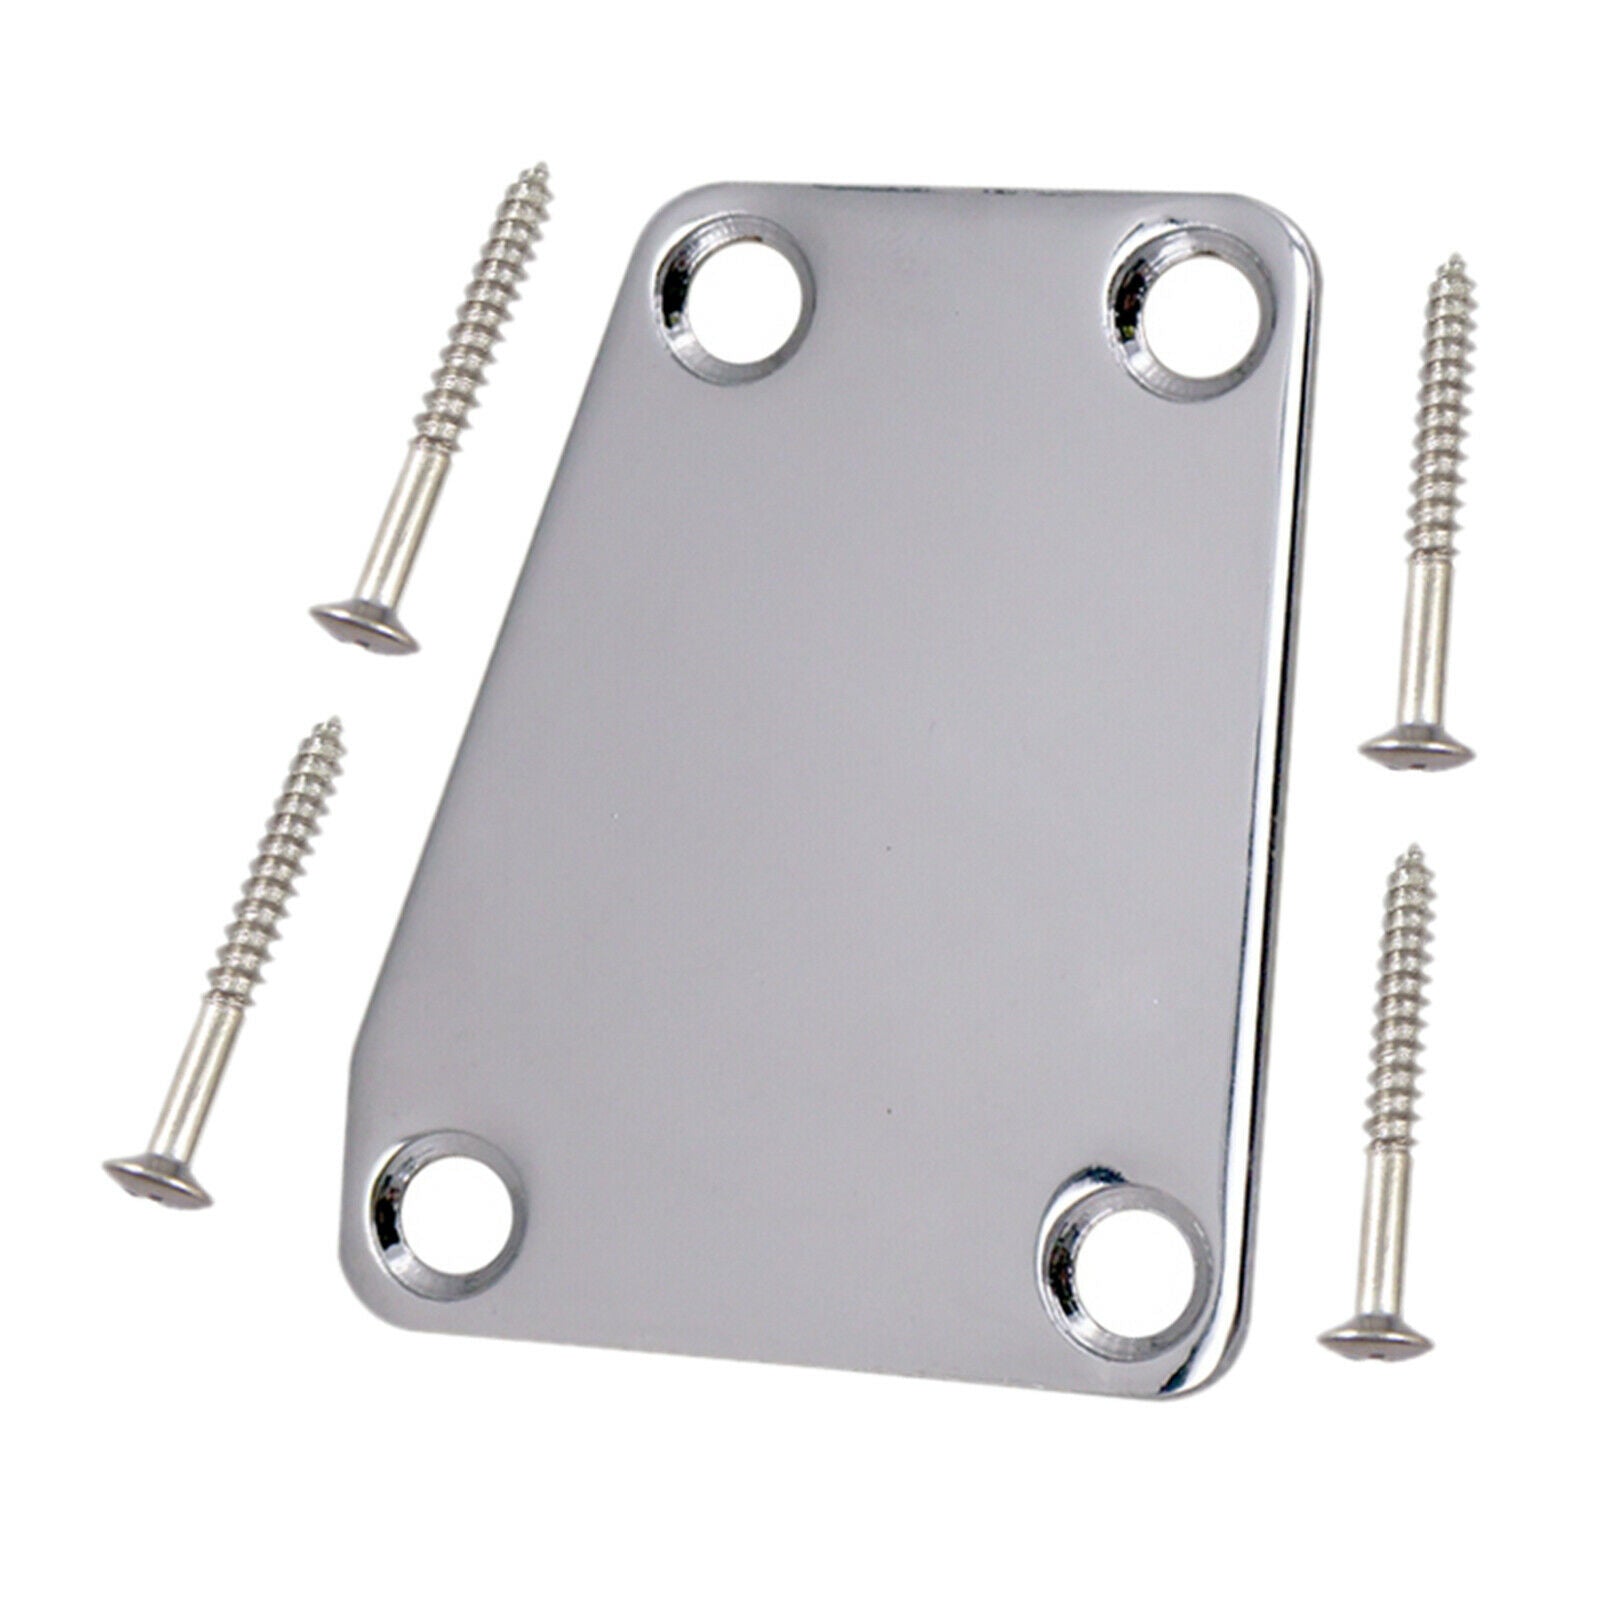 Electric Guitar Neckplate with Mounting Screws Fits for ST Electric Guitar